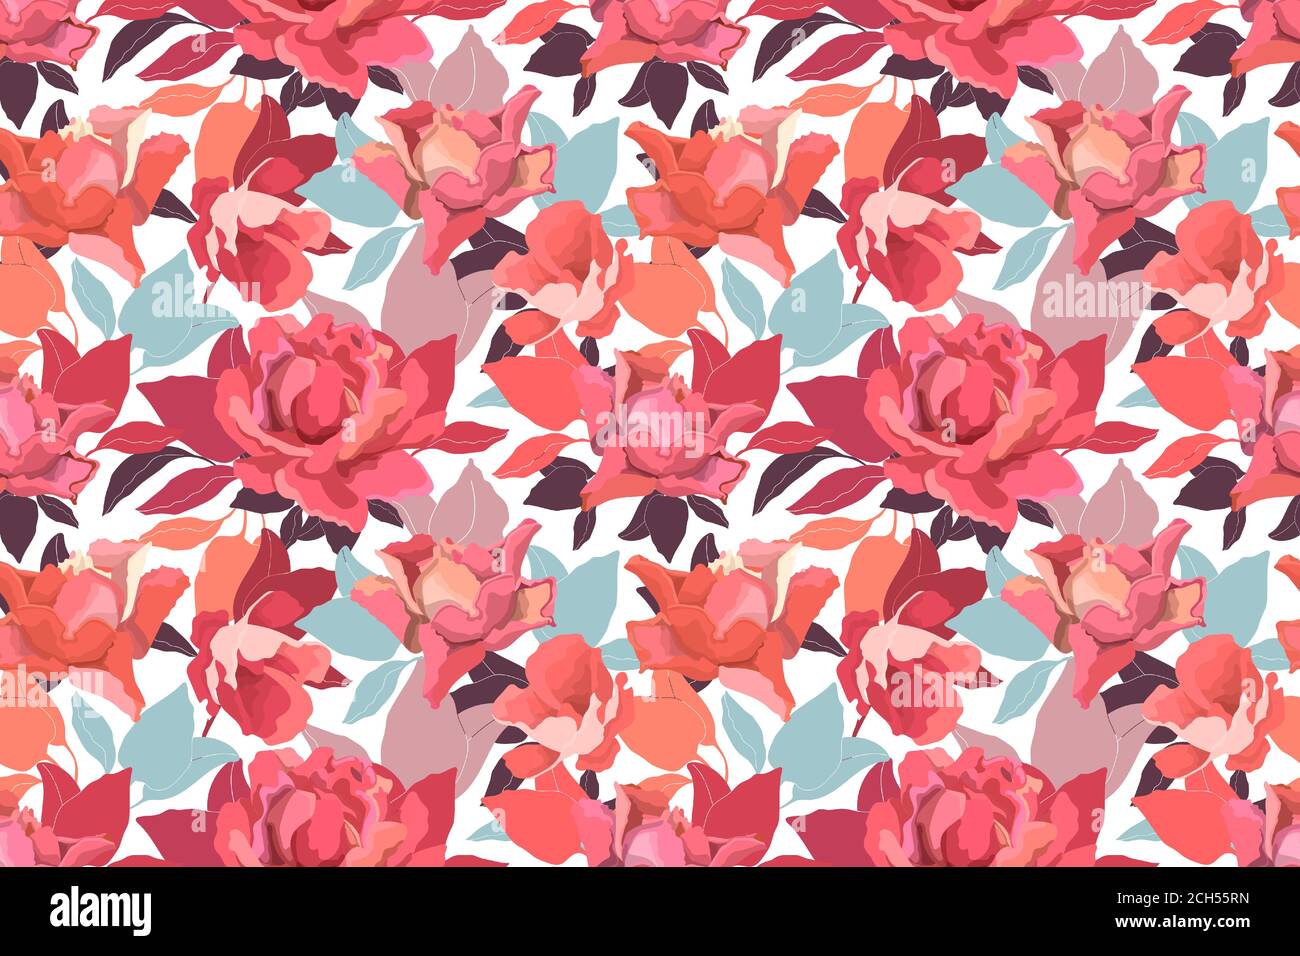 Vector floral seamless pattern with roses. Garden flowers in a warm color. Stock Vector